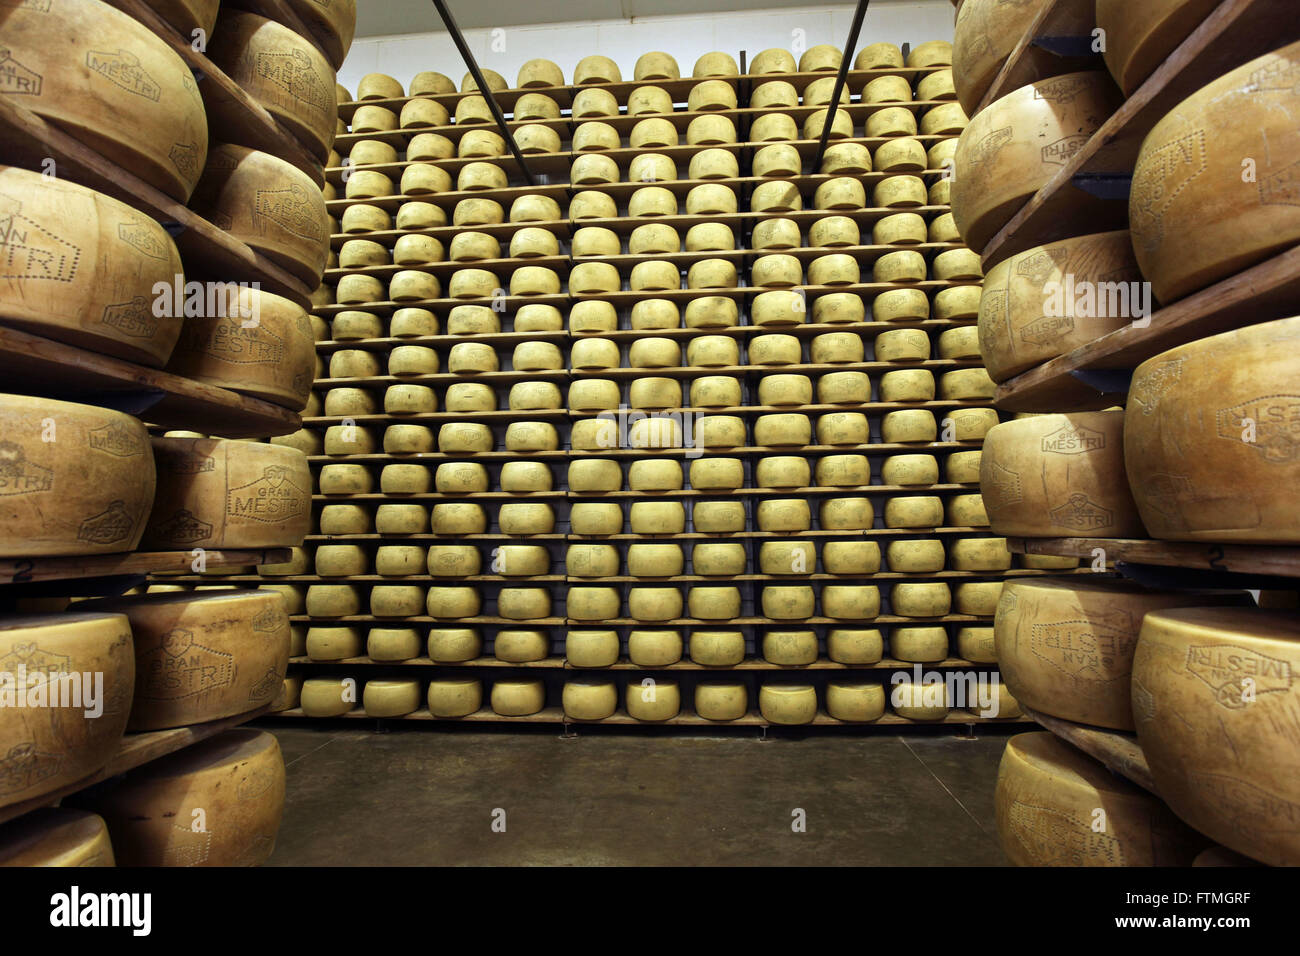 Chamber maturation of cheese Grana type in dairy industry Stock Photo